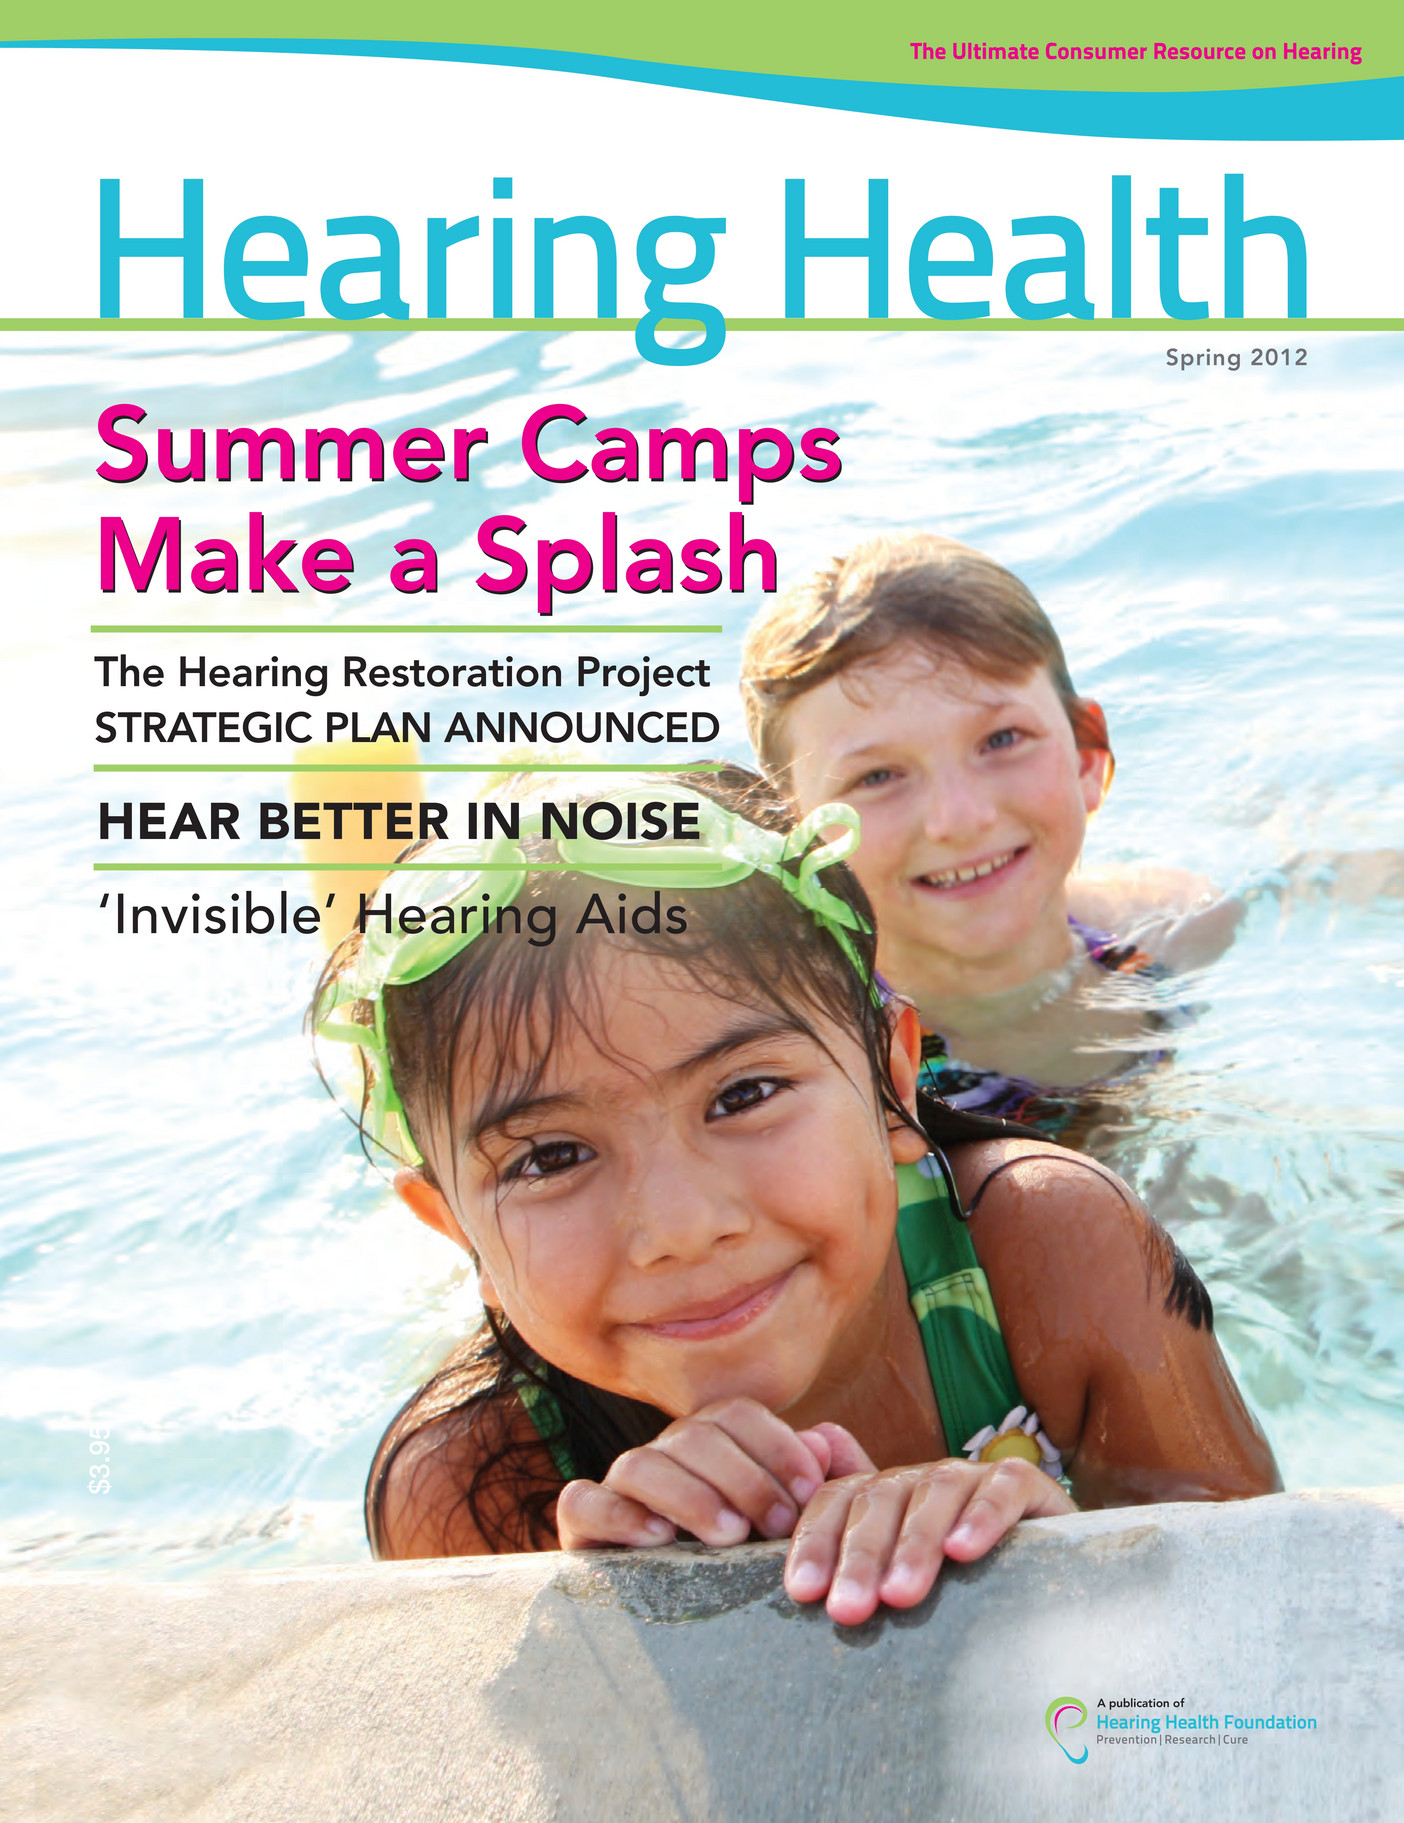 Hearing Health Foundation - Hearing Health Spring 2012 Issue - Page 1 ...